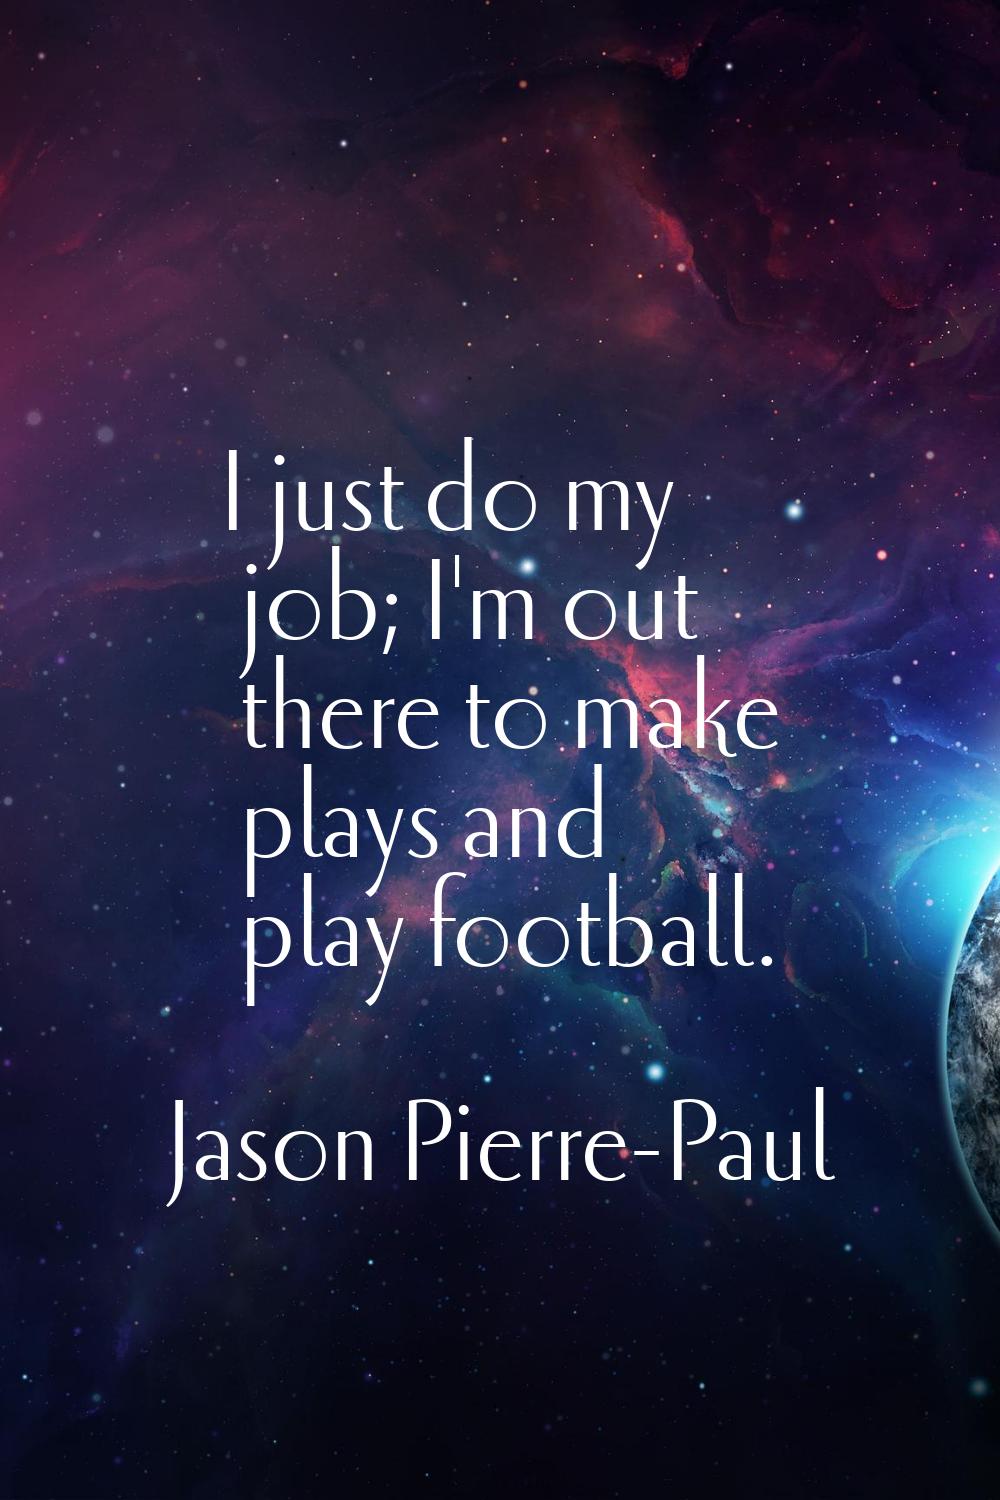 I just do my job; I'm out there to make plays and play football.